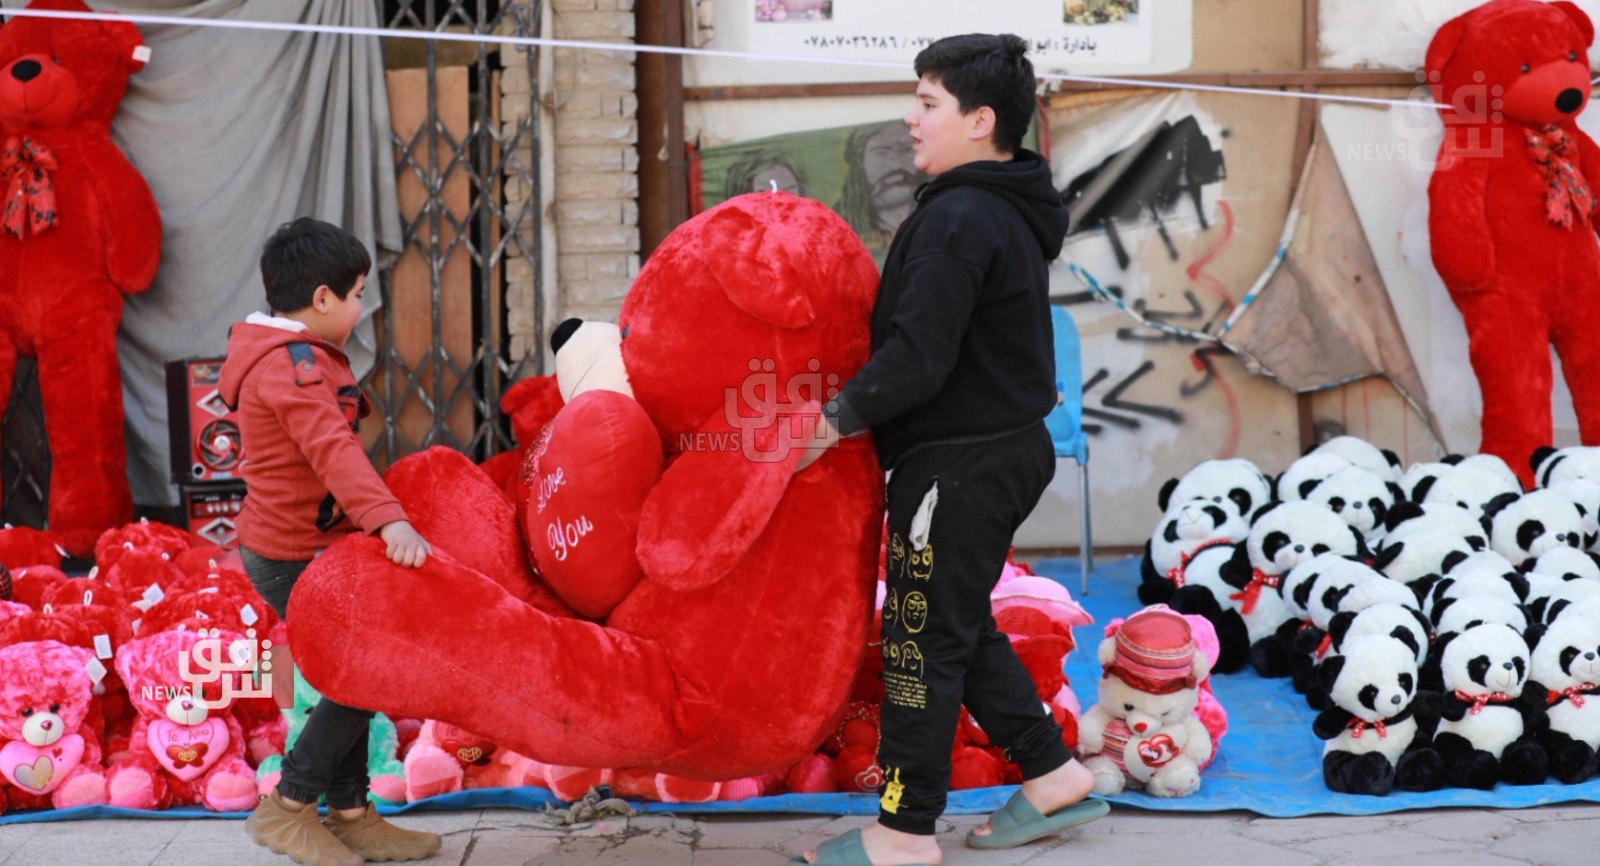 Baghdad wears red ahead of Valentine's day